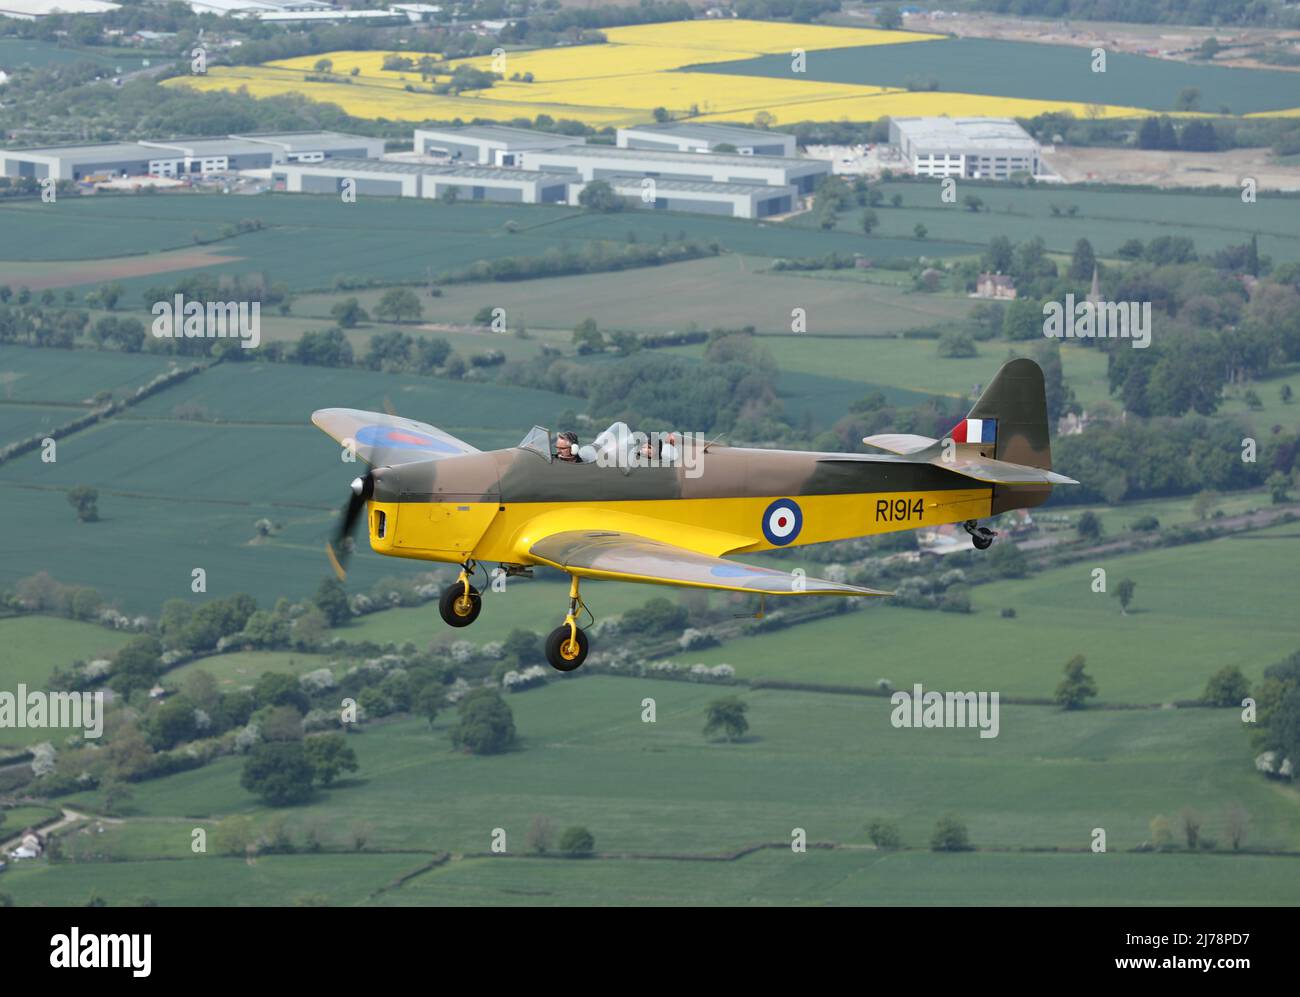 Air 2 Air photograph of the rare Miles Magister, also known as a Miles Hawk Trainer, over the Gloucestershire countryside. 1 of only 5 airworthy. Stock Photo